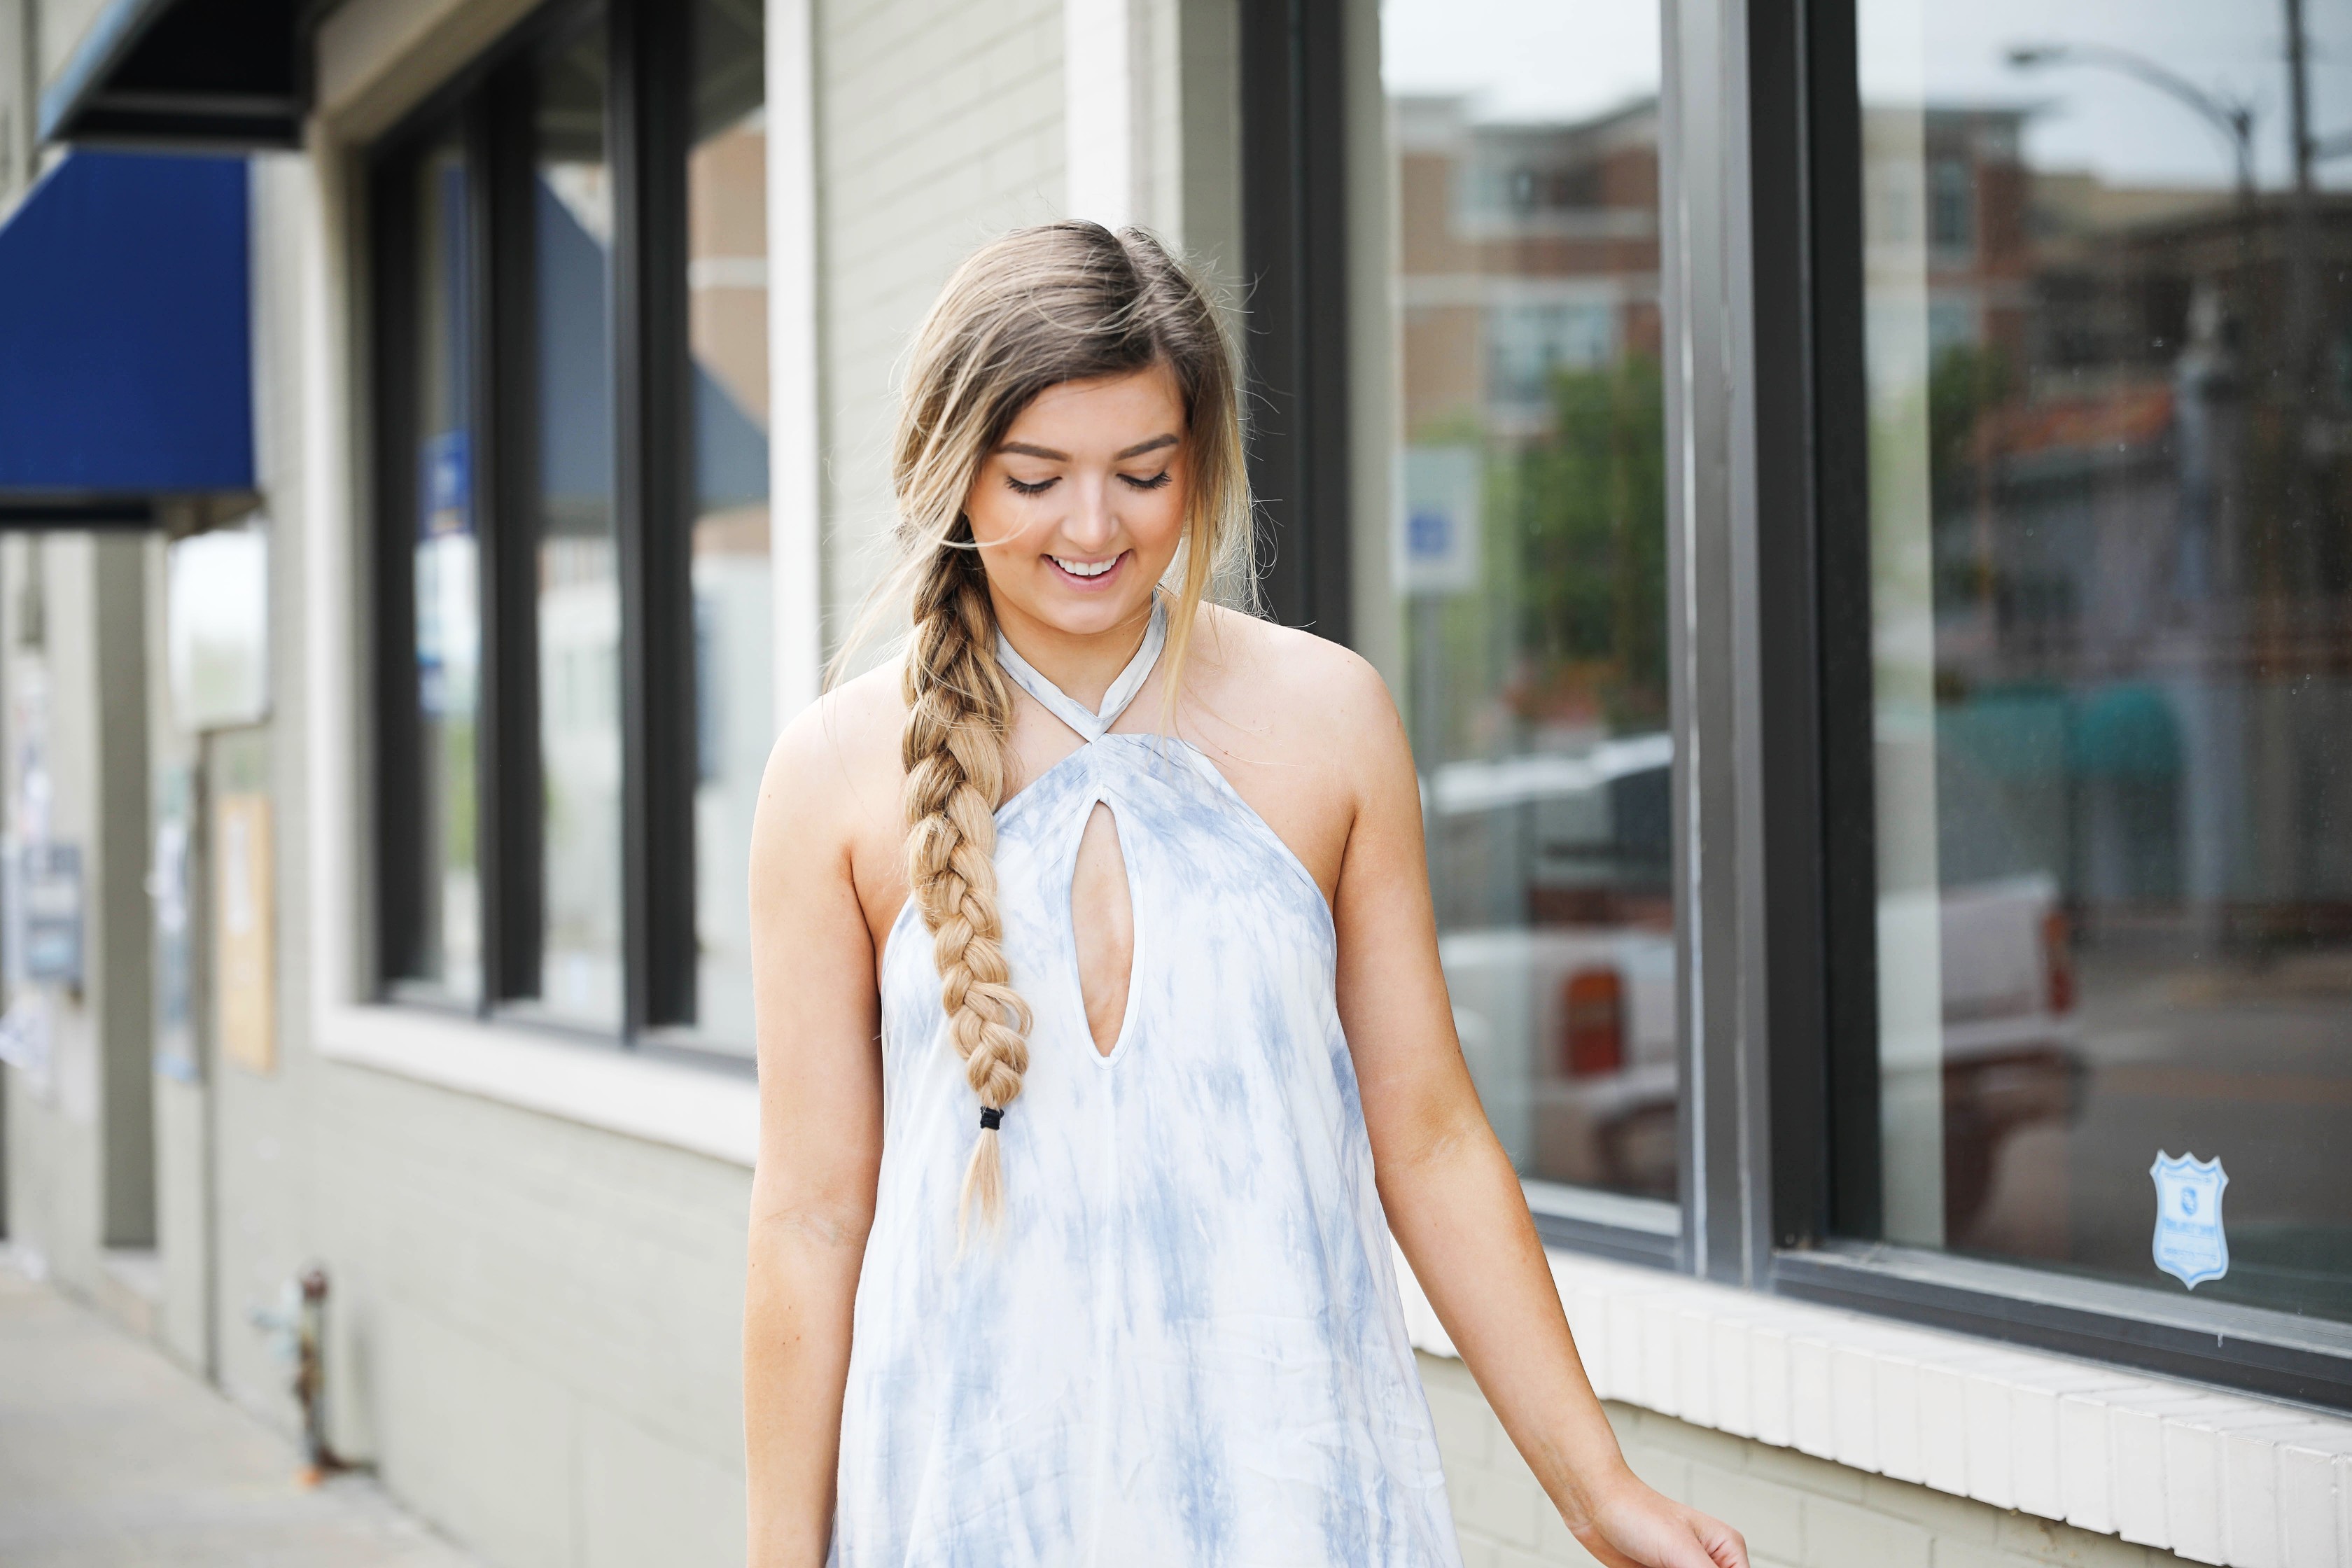 Graduation Party Outfits that you can wear again and again and transition from day to night on the fashion blog daily dose of charm on lauren lindmark dailydoseofcharm.com